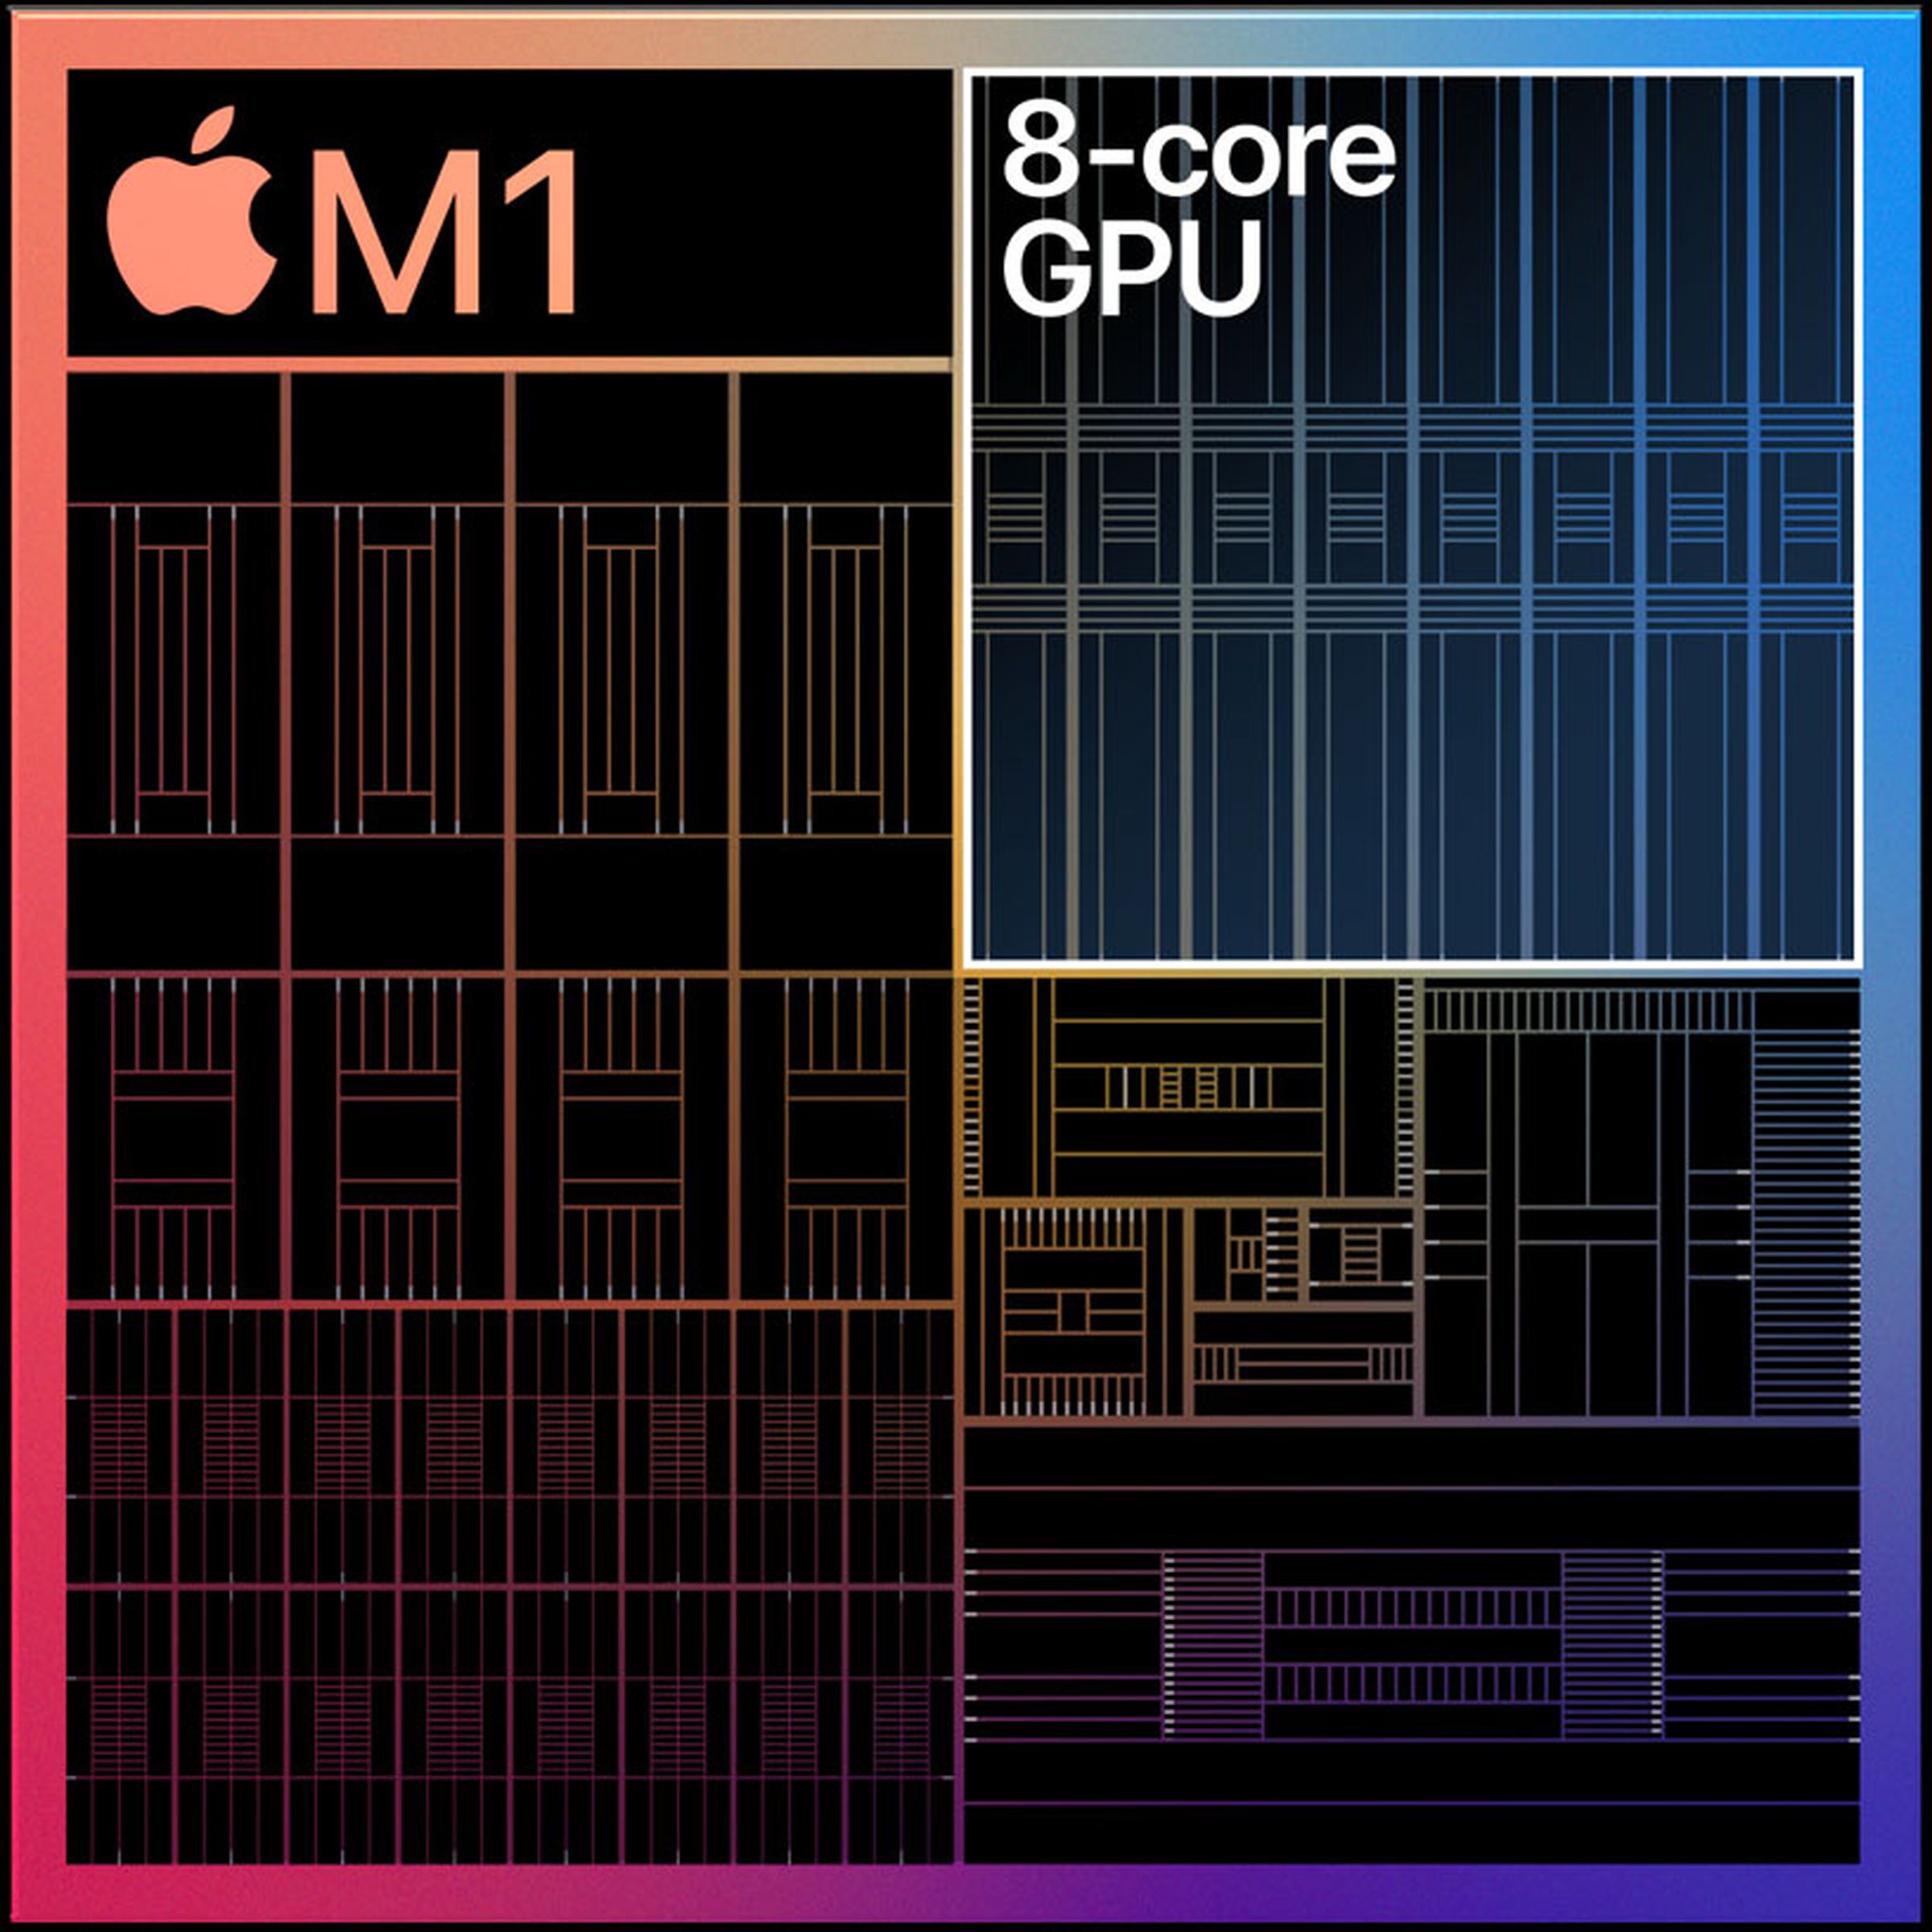 The M1 chip has up to eight dedicated GPU cores.